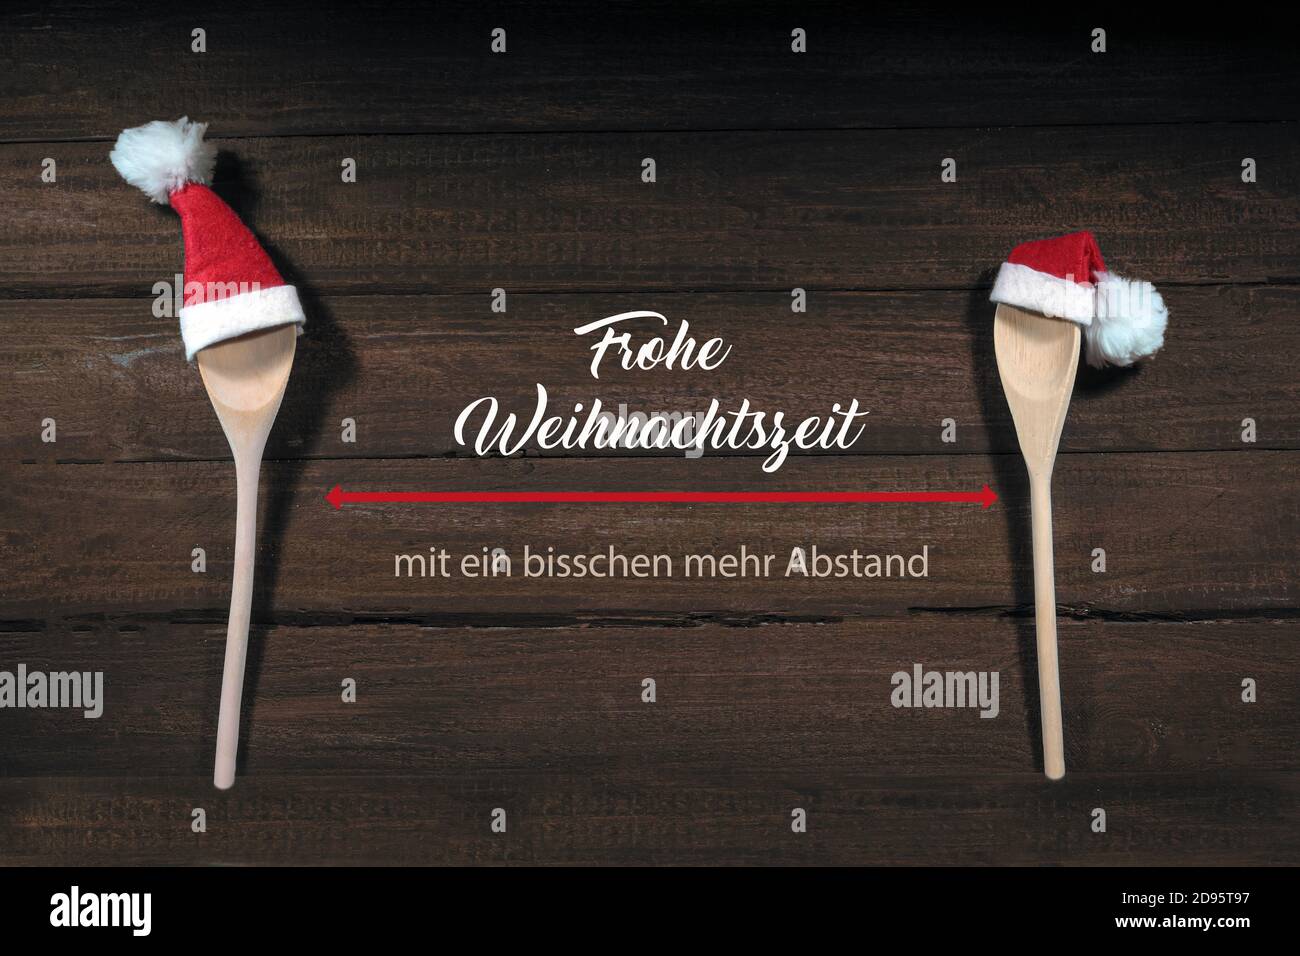 Two cooking spoons with red Santa Claus hats, German text Frohe Weihnachtszeit mit ein bisschen mehr Abstand, meaning Merry Christmas with social dist Stock Photo